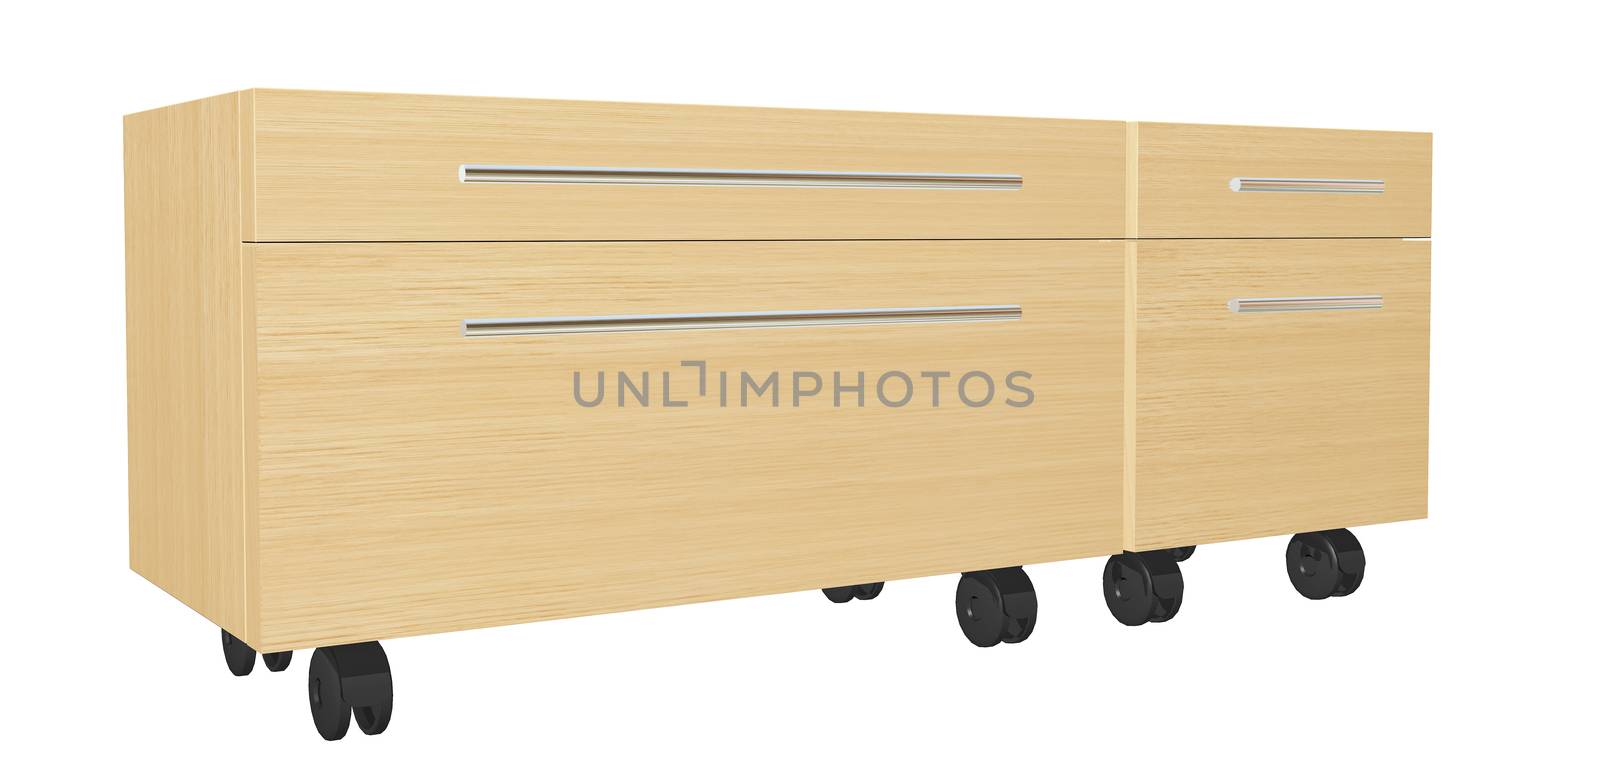 Bedroom dresser with drawers, on wheels, isolated against a white background